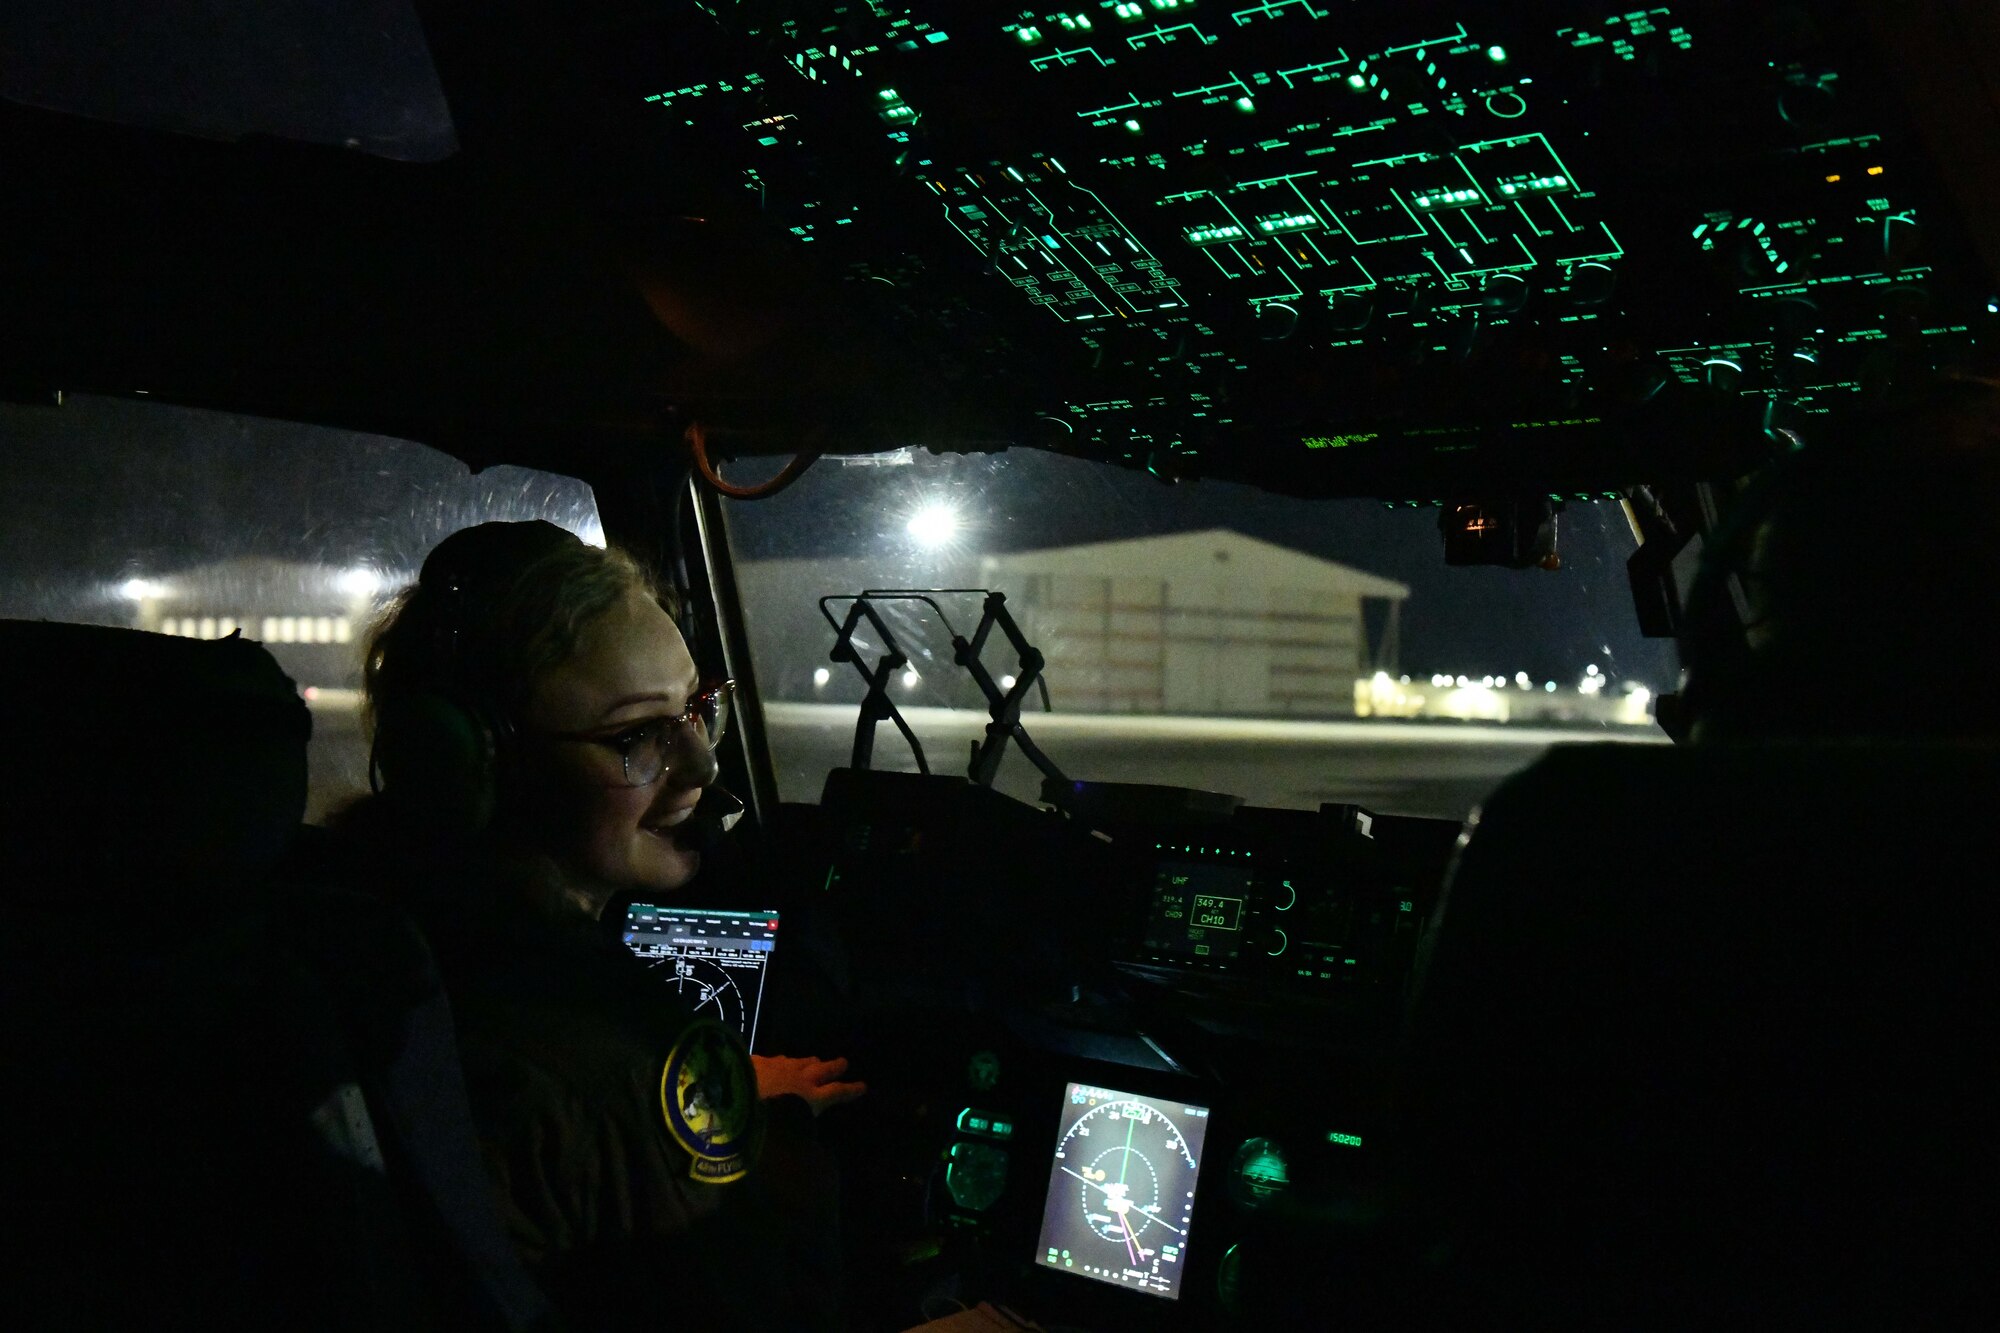 U.S. Air Force Capt. Chrissy McMillan, 58th Airlift Squadron (AS) student pilot, speaks to Capt. Dylan Radka, 58th AS instructor pilot, prior to taking off in a C-17 Globemaster III at Travis Air Force Base, California, Jan. 24, 2023. The crew completed more than eight flying hours during off-station training due to inclement weather. (U.S. Air Force photo by Airman 1st Class Miyah Gray)